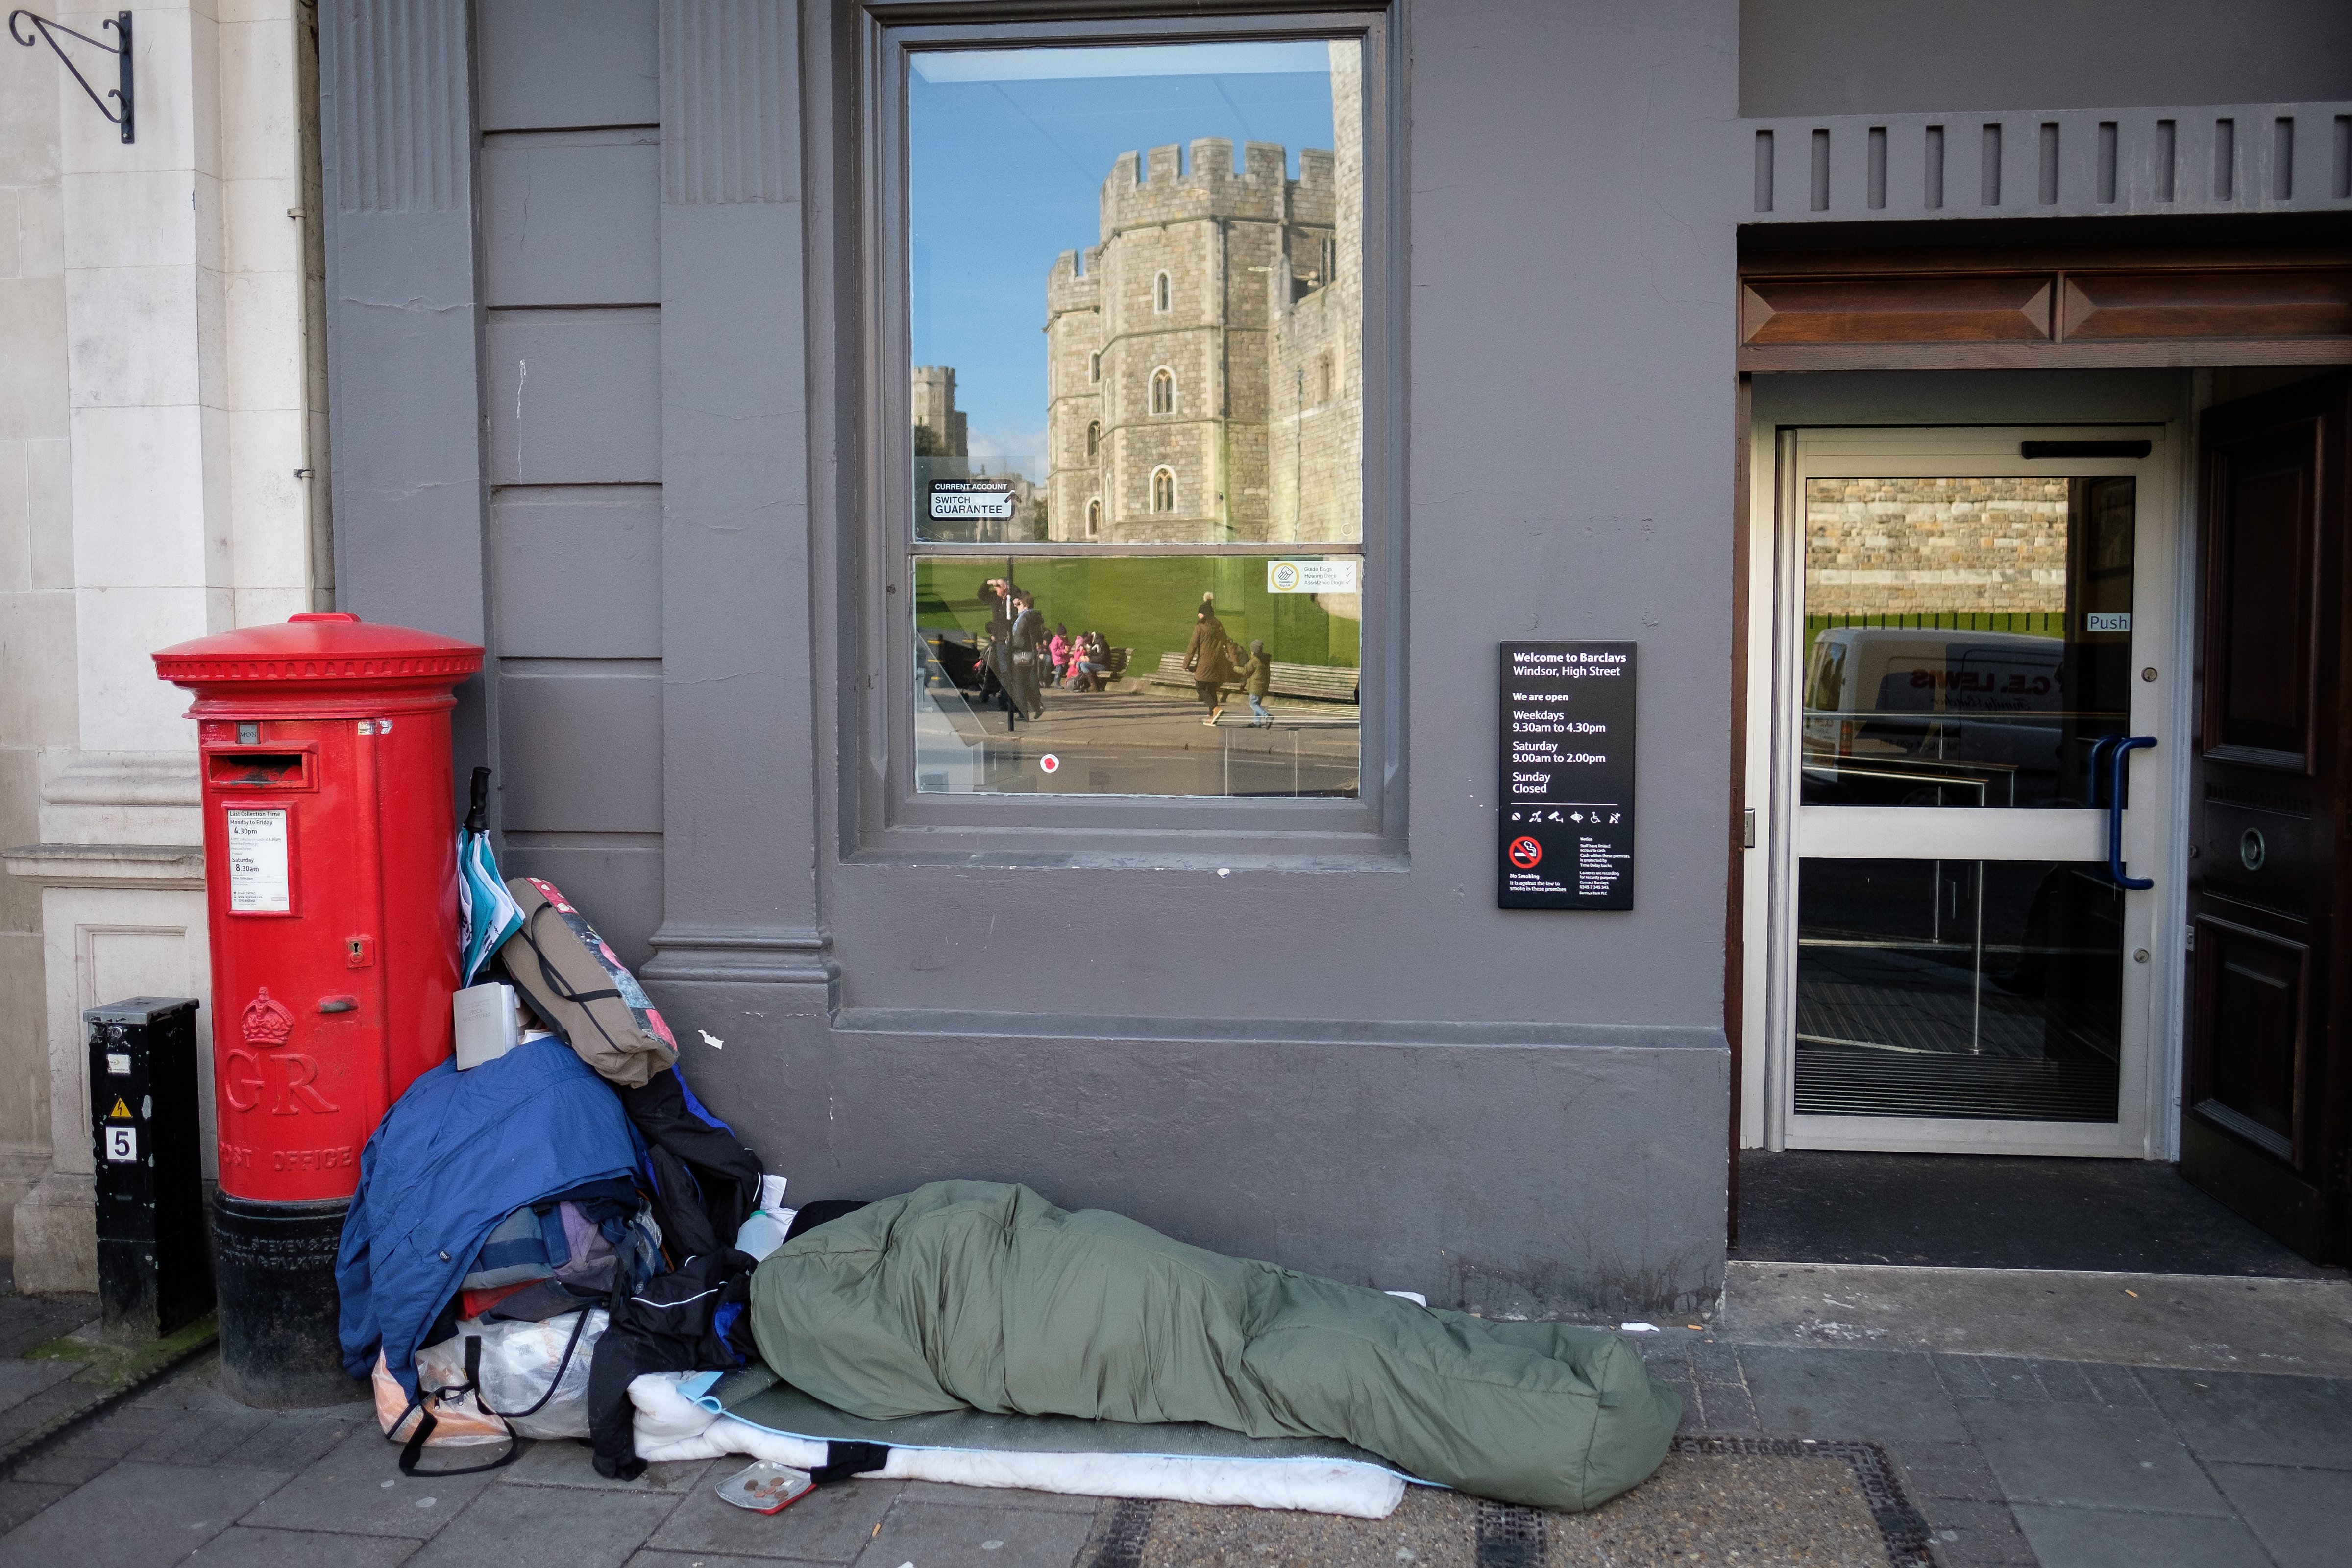 Windsor Castle is seen in the reflection of a bank window as Sunny, a homeless man who has been on the streets of Windsor for around eight months, lays in his sleeping bag on January 5, 2018 in Windsor, England. (Leon Neal&mdash;Getty Images)